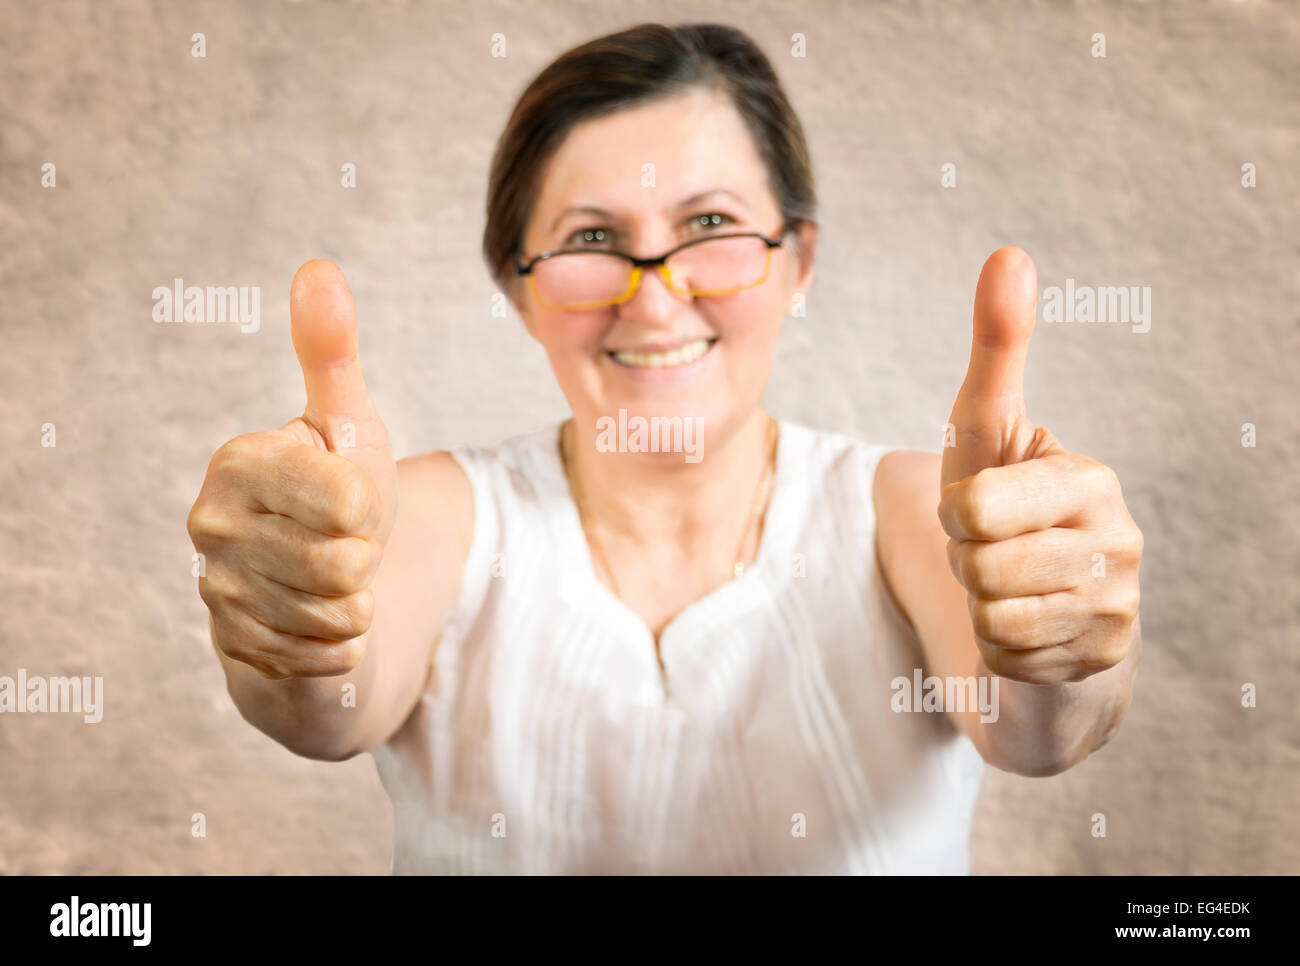 Happy woman showing thumb up.Approval or endorsement concept. Shallow depth of field - finger in focus. Stock Photo